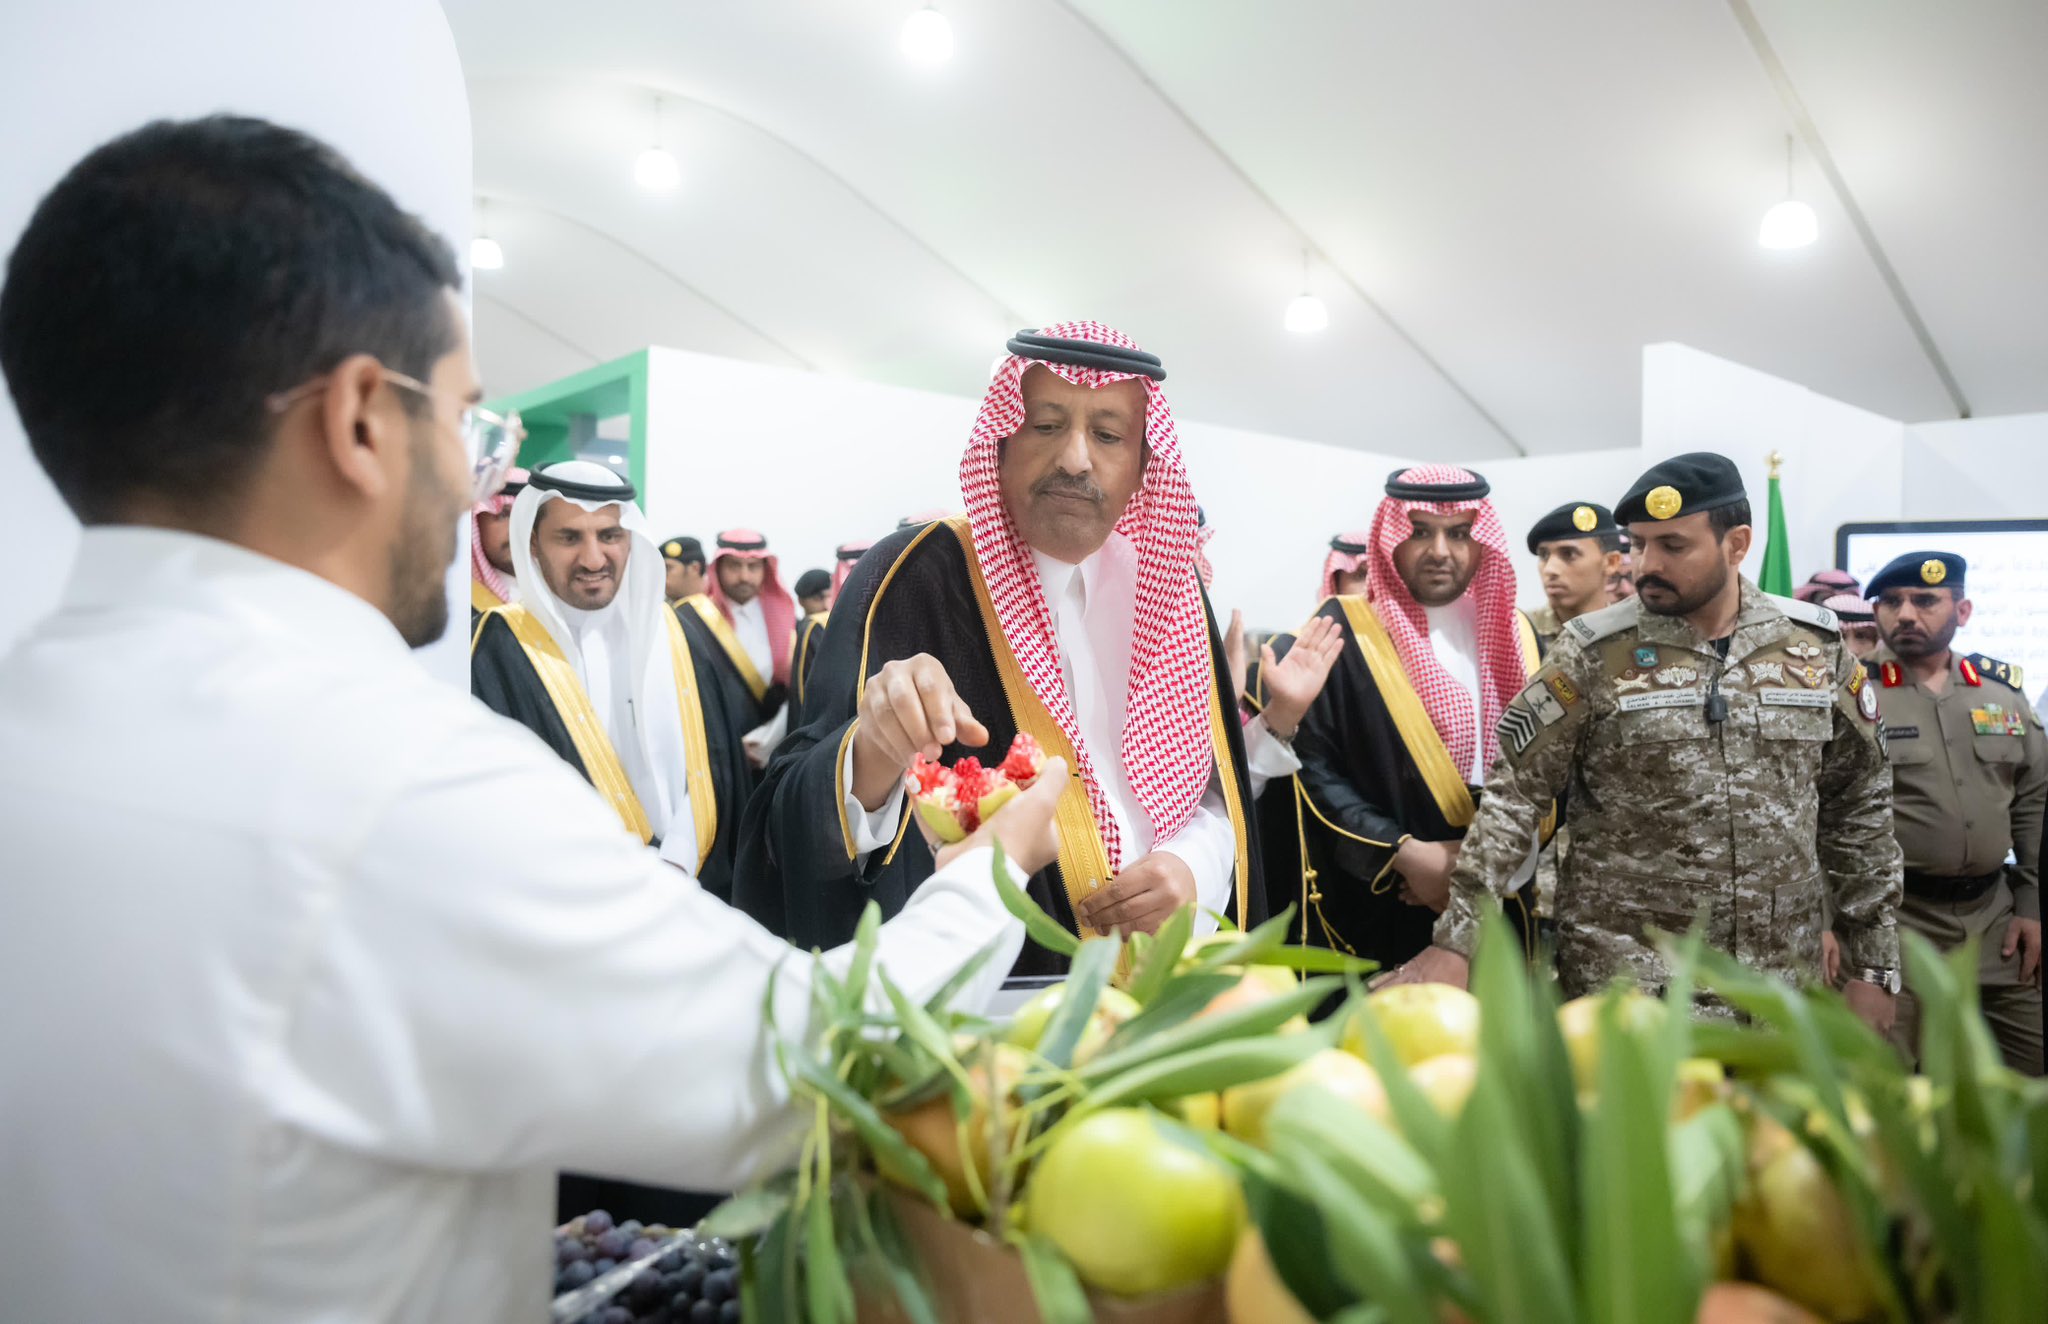 His Highness the Emir of Al-Baha Region inaugurates the 12th Pomegranate Festival in Al-Qura Governorate